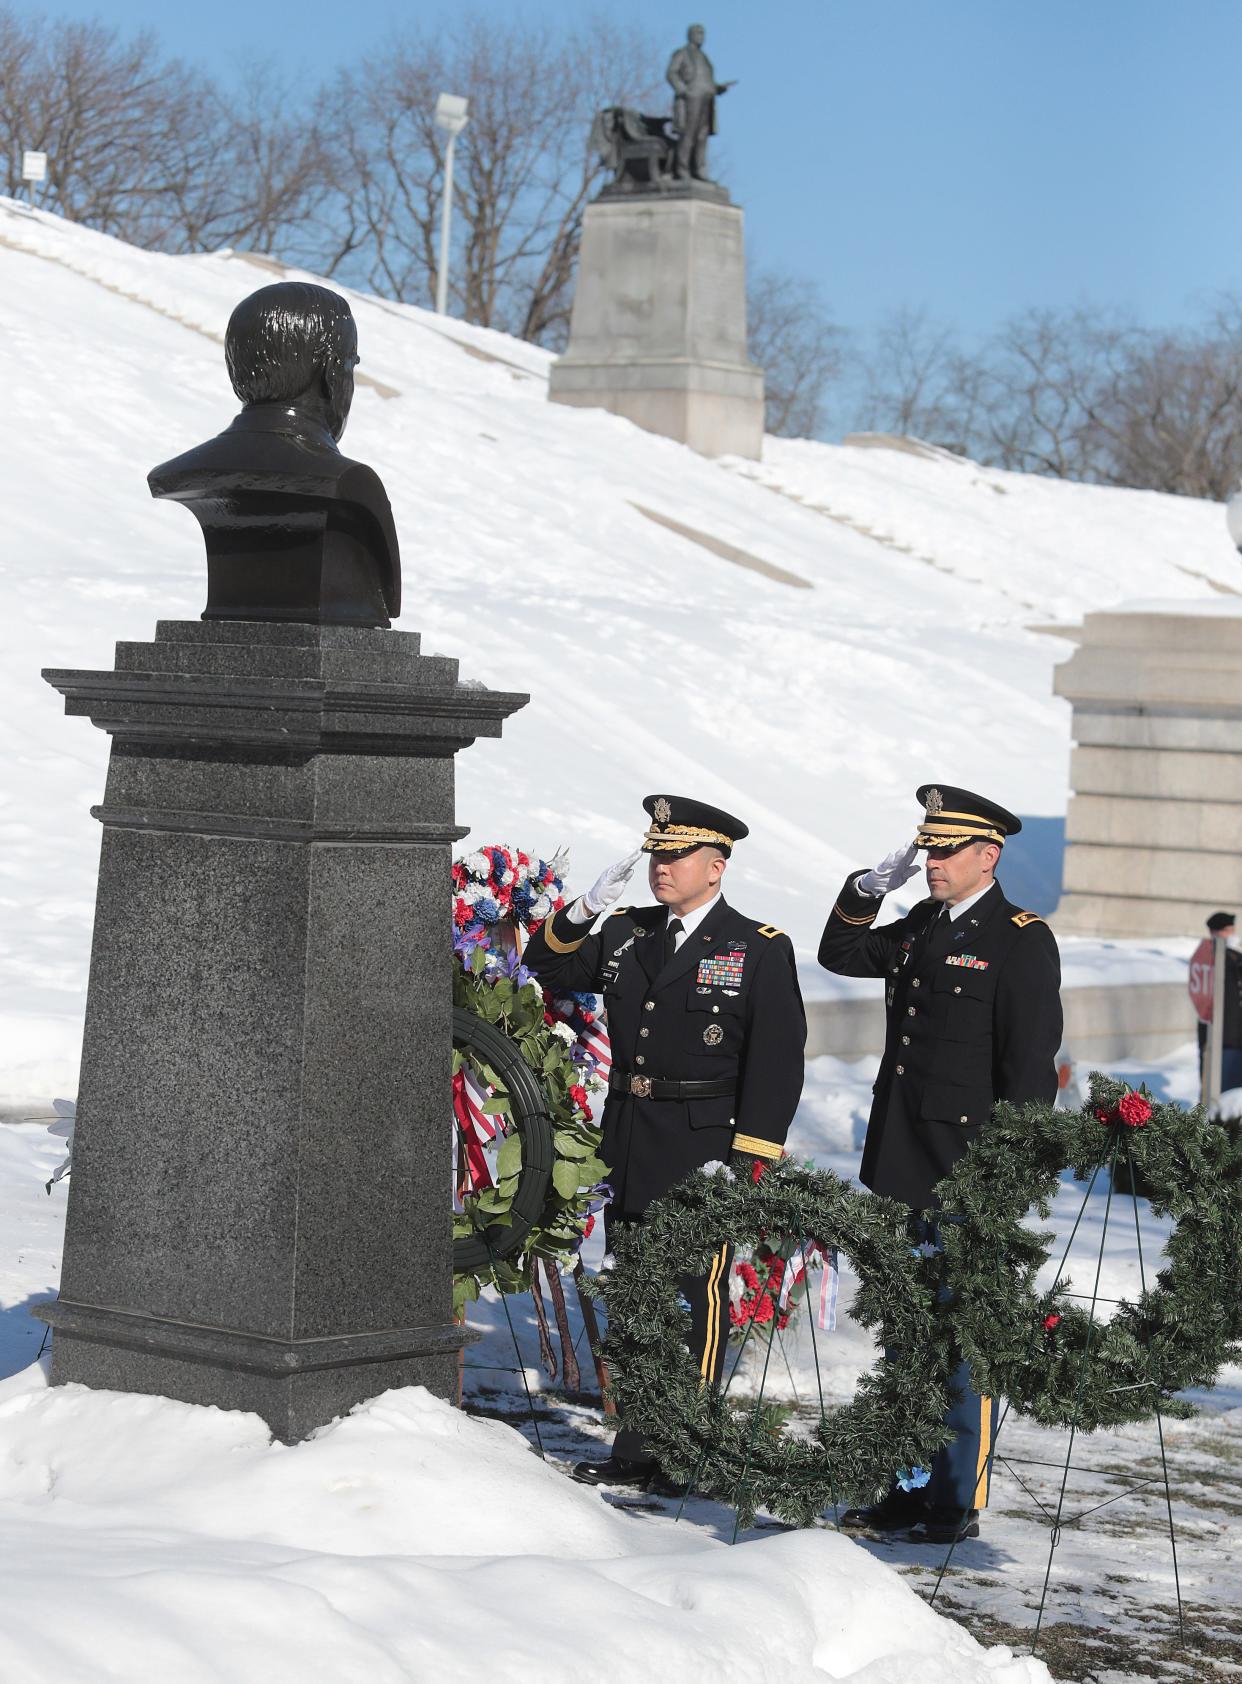 Brig. Gen. Jake S. Kwon, left, on behalf of President Joe Biden, and Maj. Timothy Paroz, salute the bust of President William McKinley at the annual wreath-laying ceremony Saturday honoring McKinley's birthday.